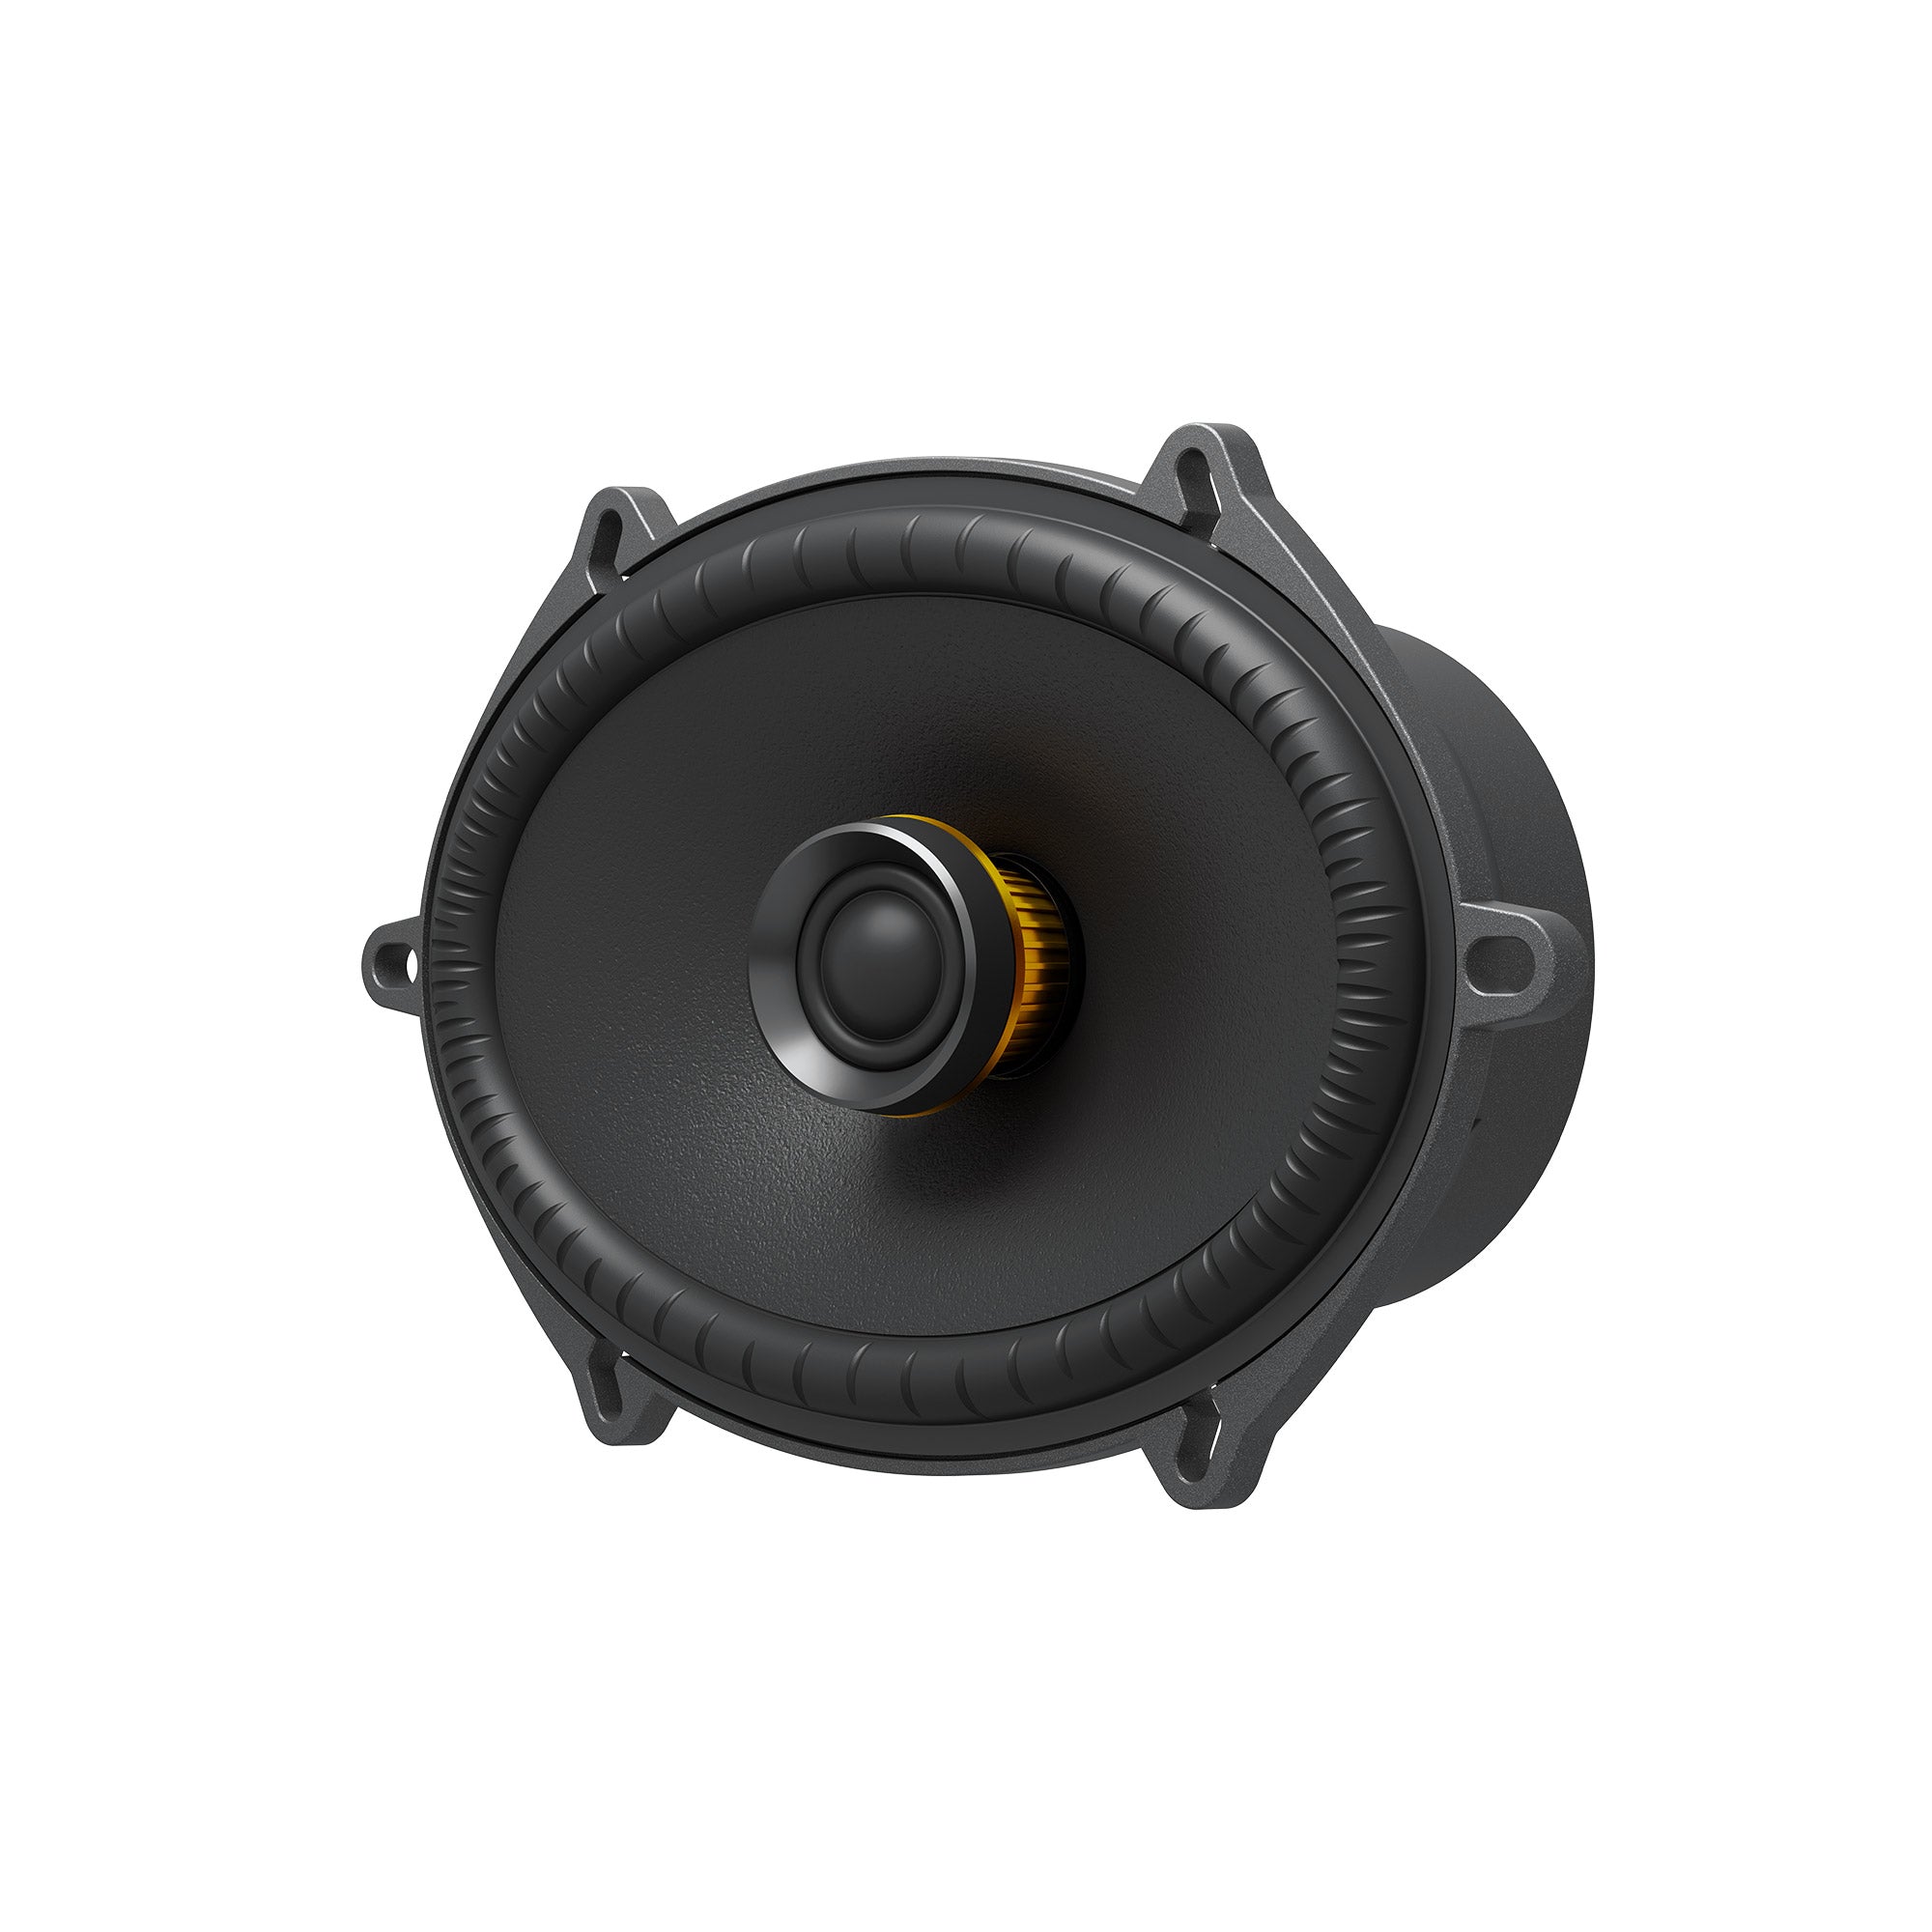 Sony XS-680ES | 6 x 8 in (16 x 20 cm) Mobile ES™ Coaxial Two-way Speakers